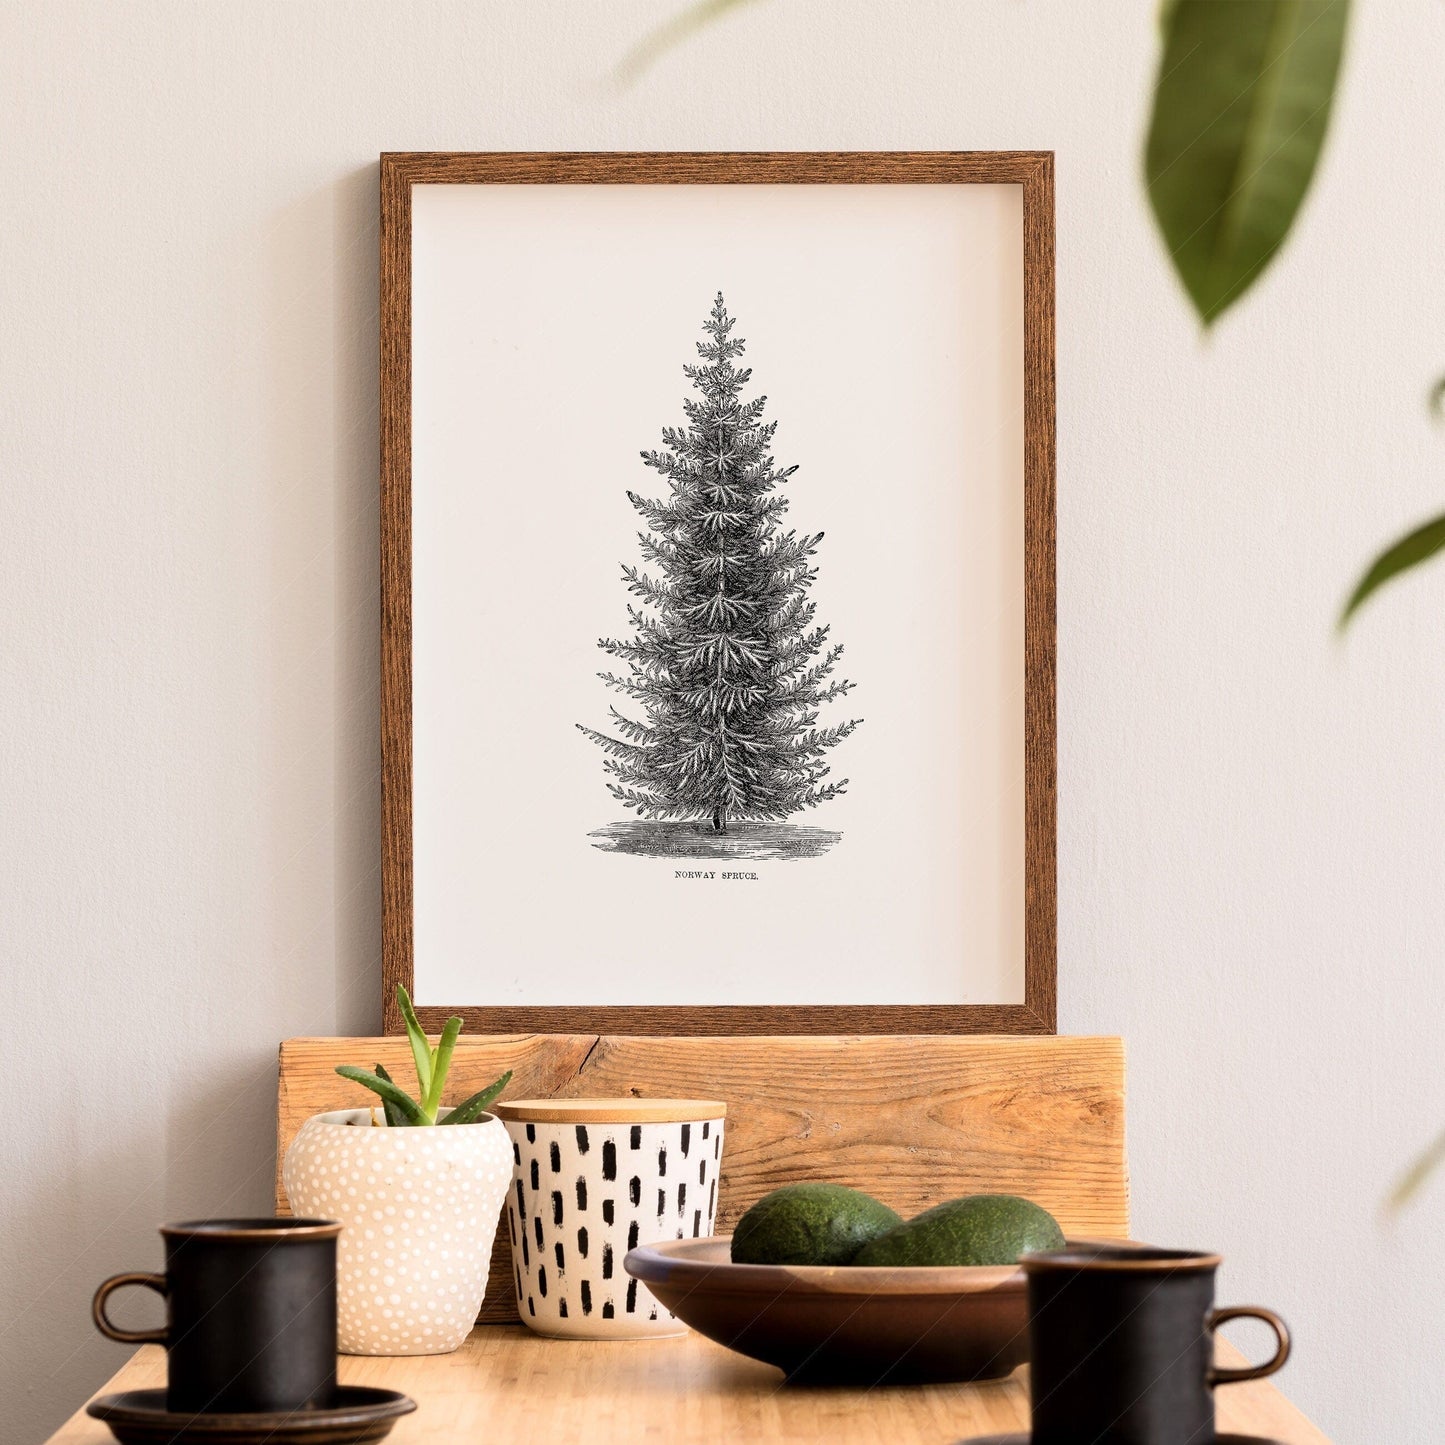 Home Poster Decor Norway spruce tree, Botanical Print, Forest Poster, Winter Tree Photo, Pine Tree Print, Vintage Nature Art, Vintage Gift, Nordic Forest